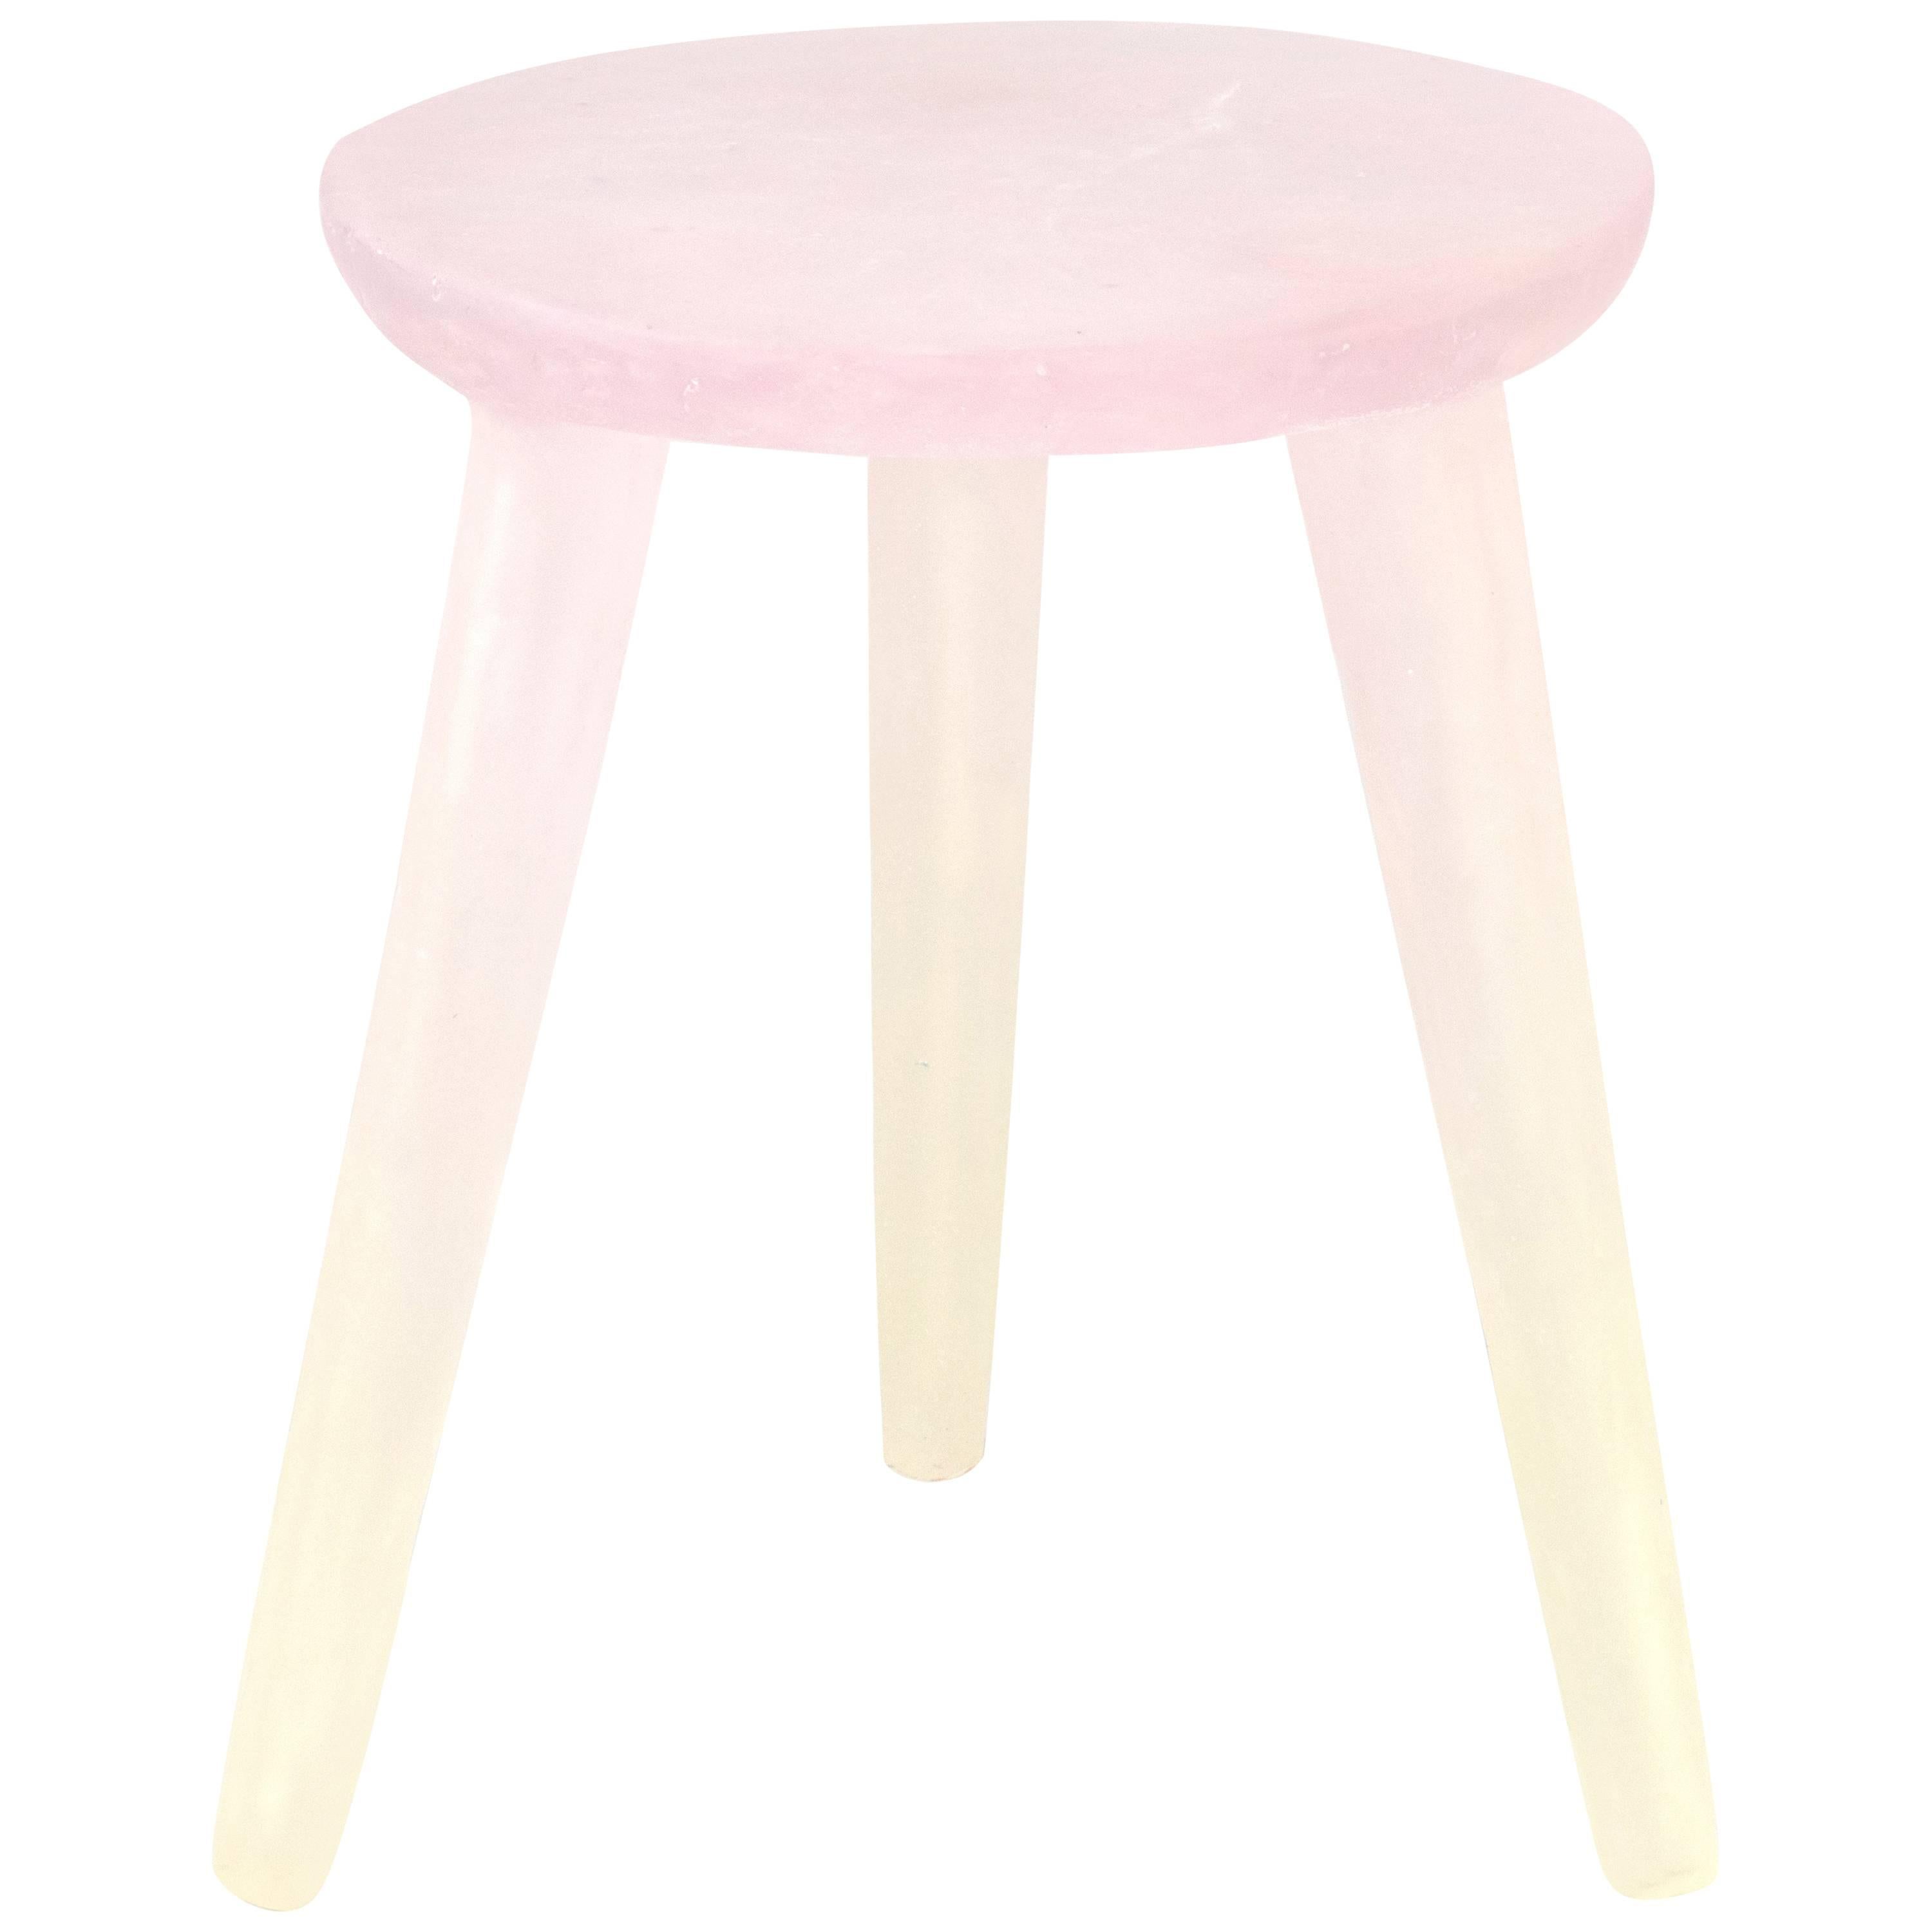 Glow Side Table or Stool in Pink to Yellow, Handmade from Recycled Resin For Sale